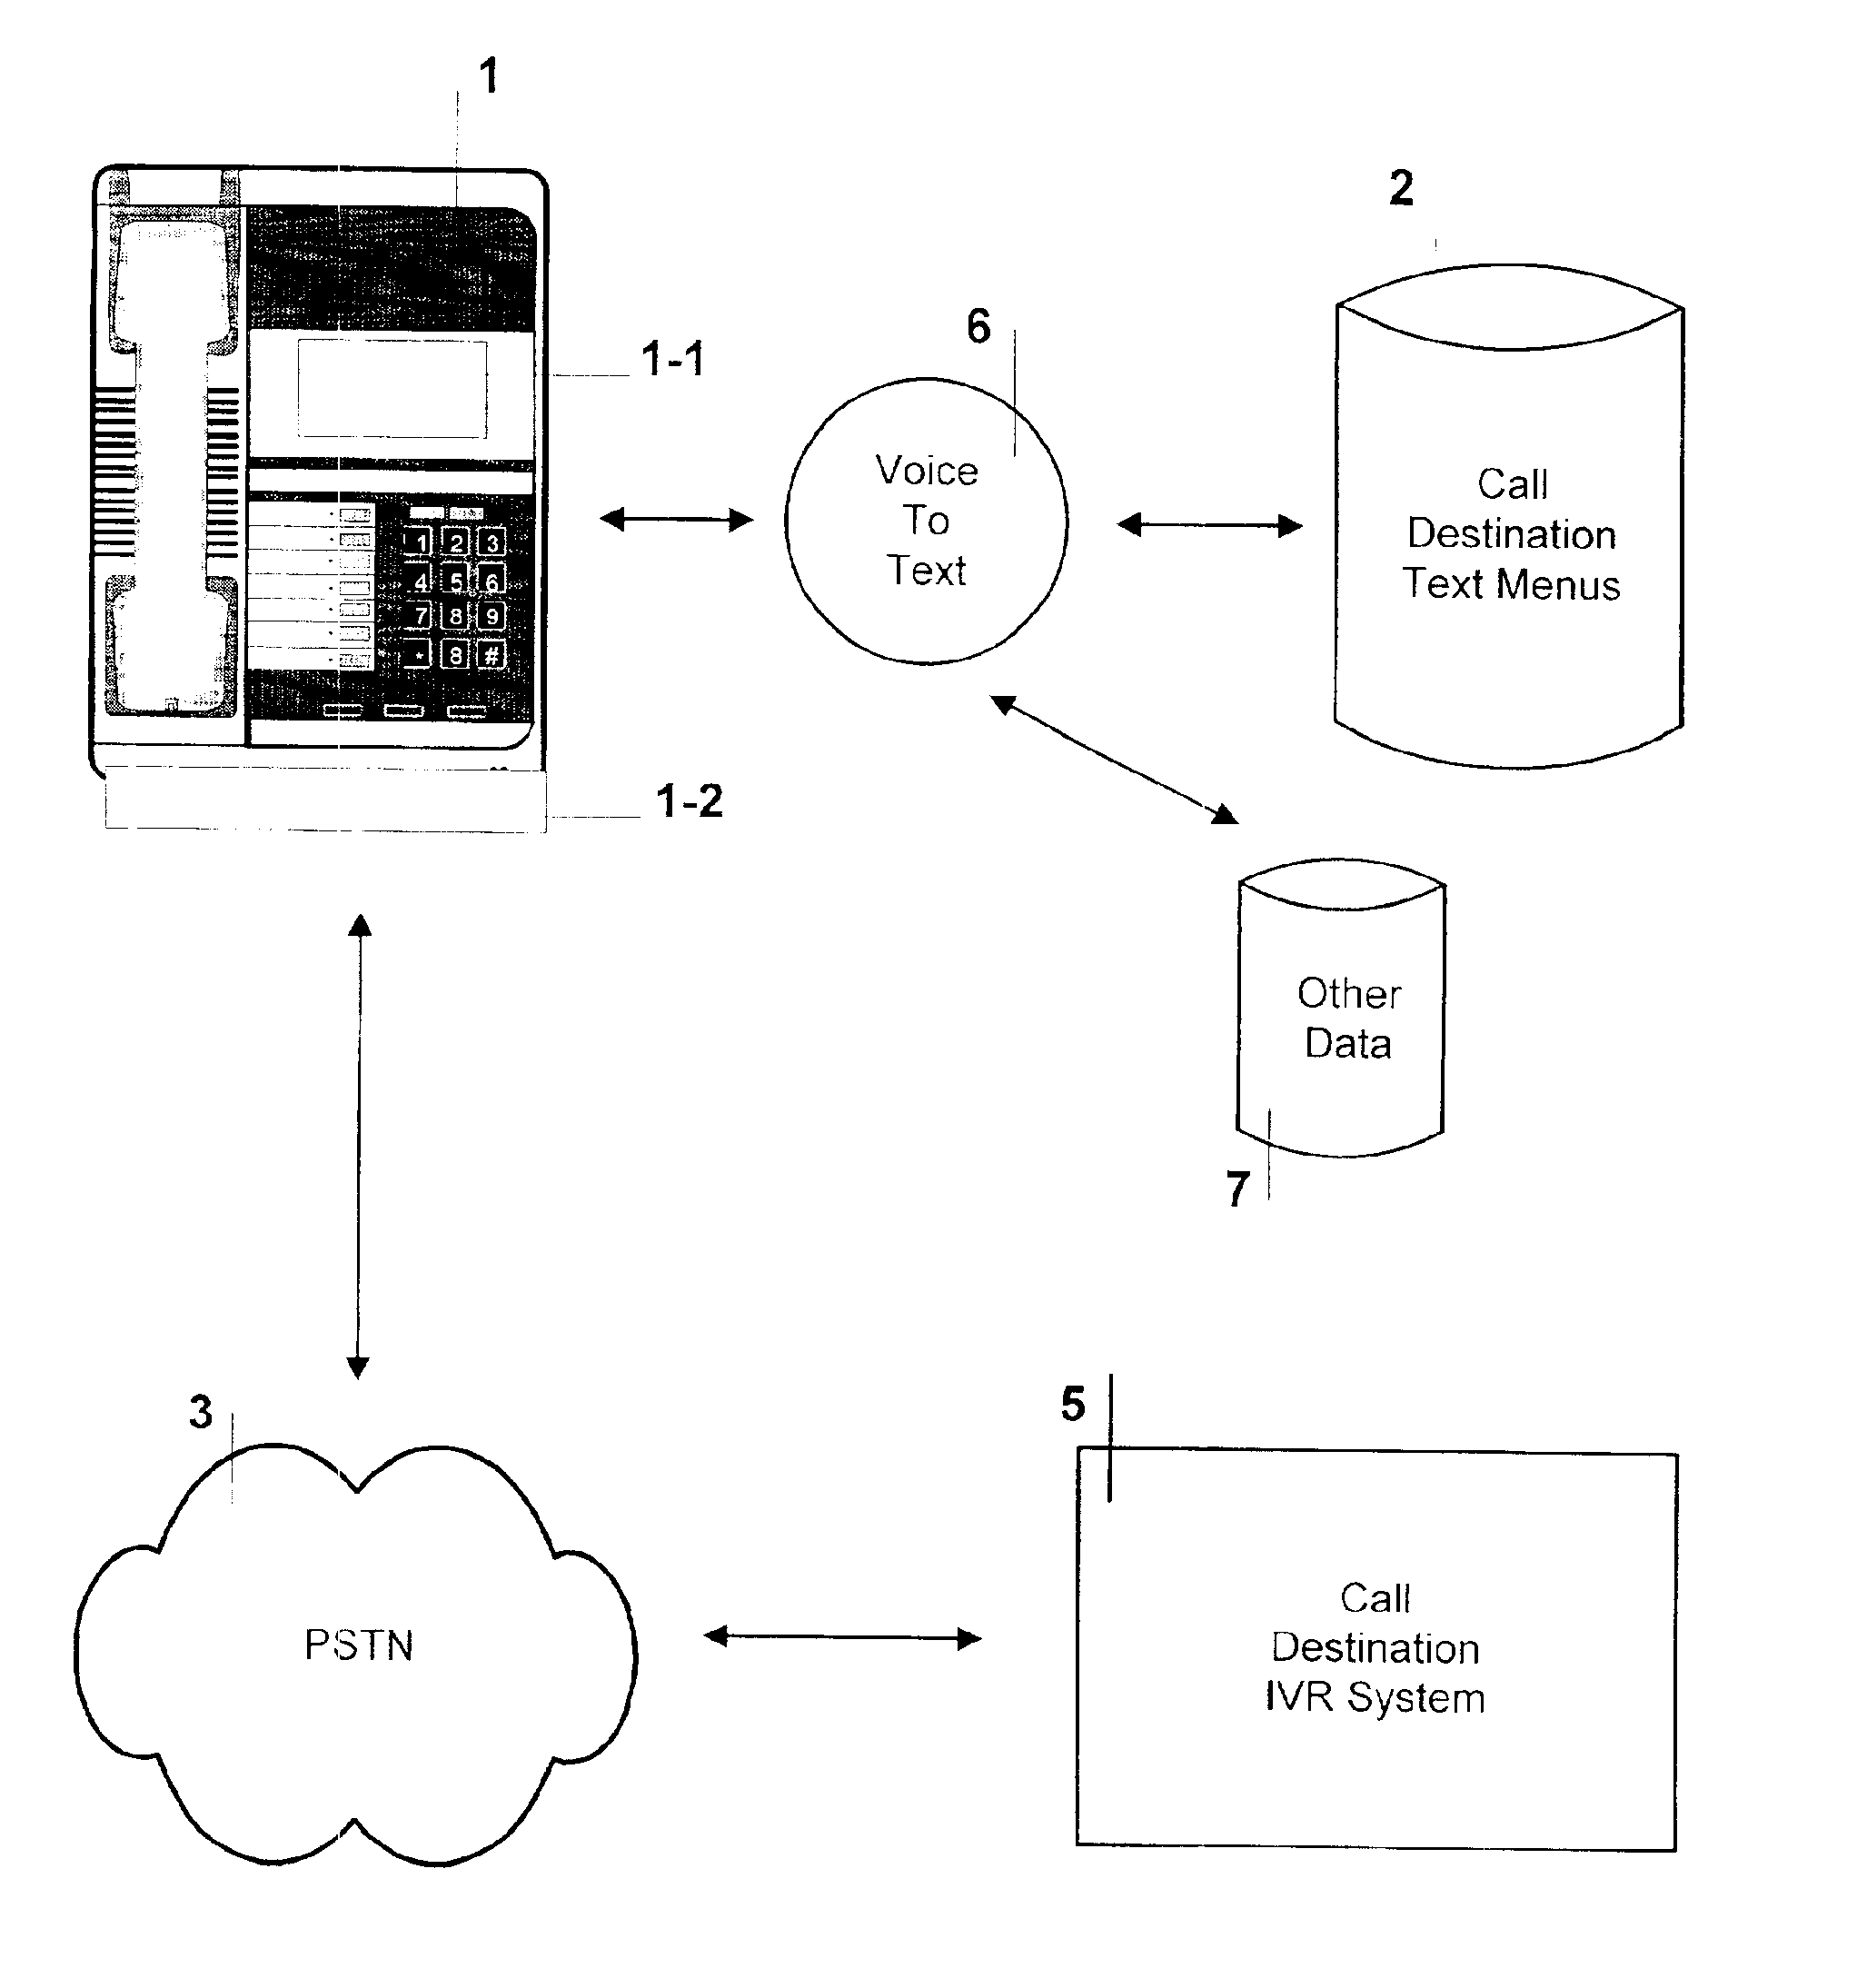 System and method for integrating the visual display of text menus for interactive voice response systems